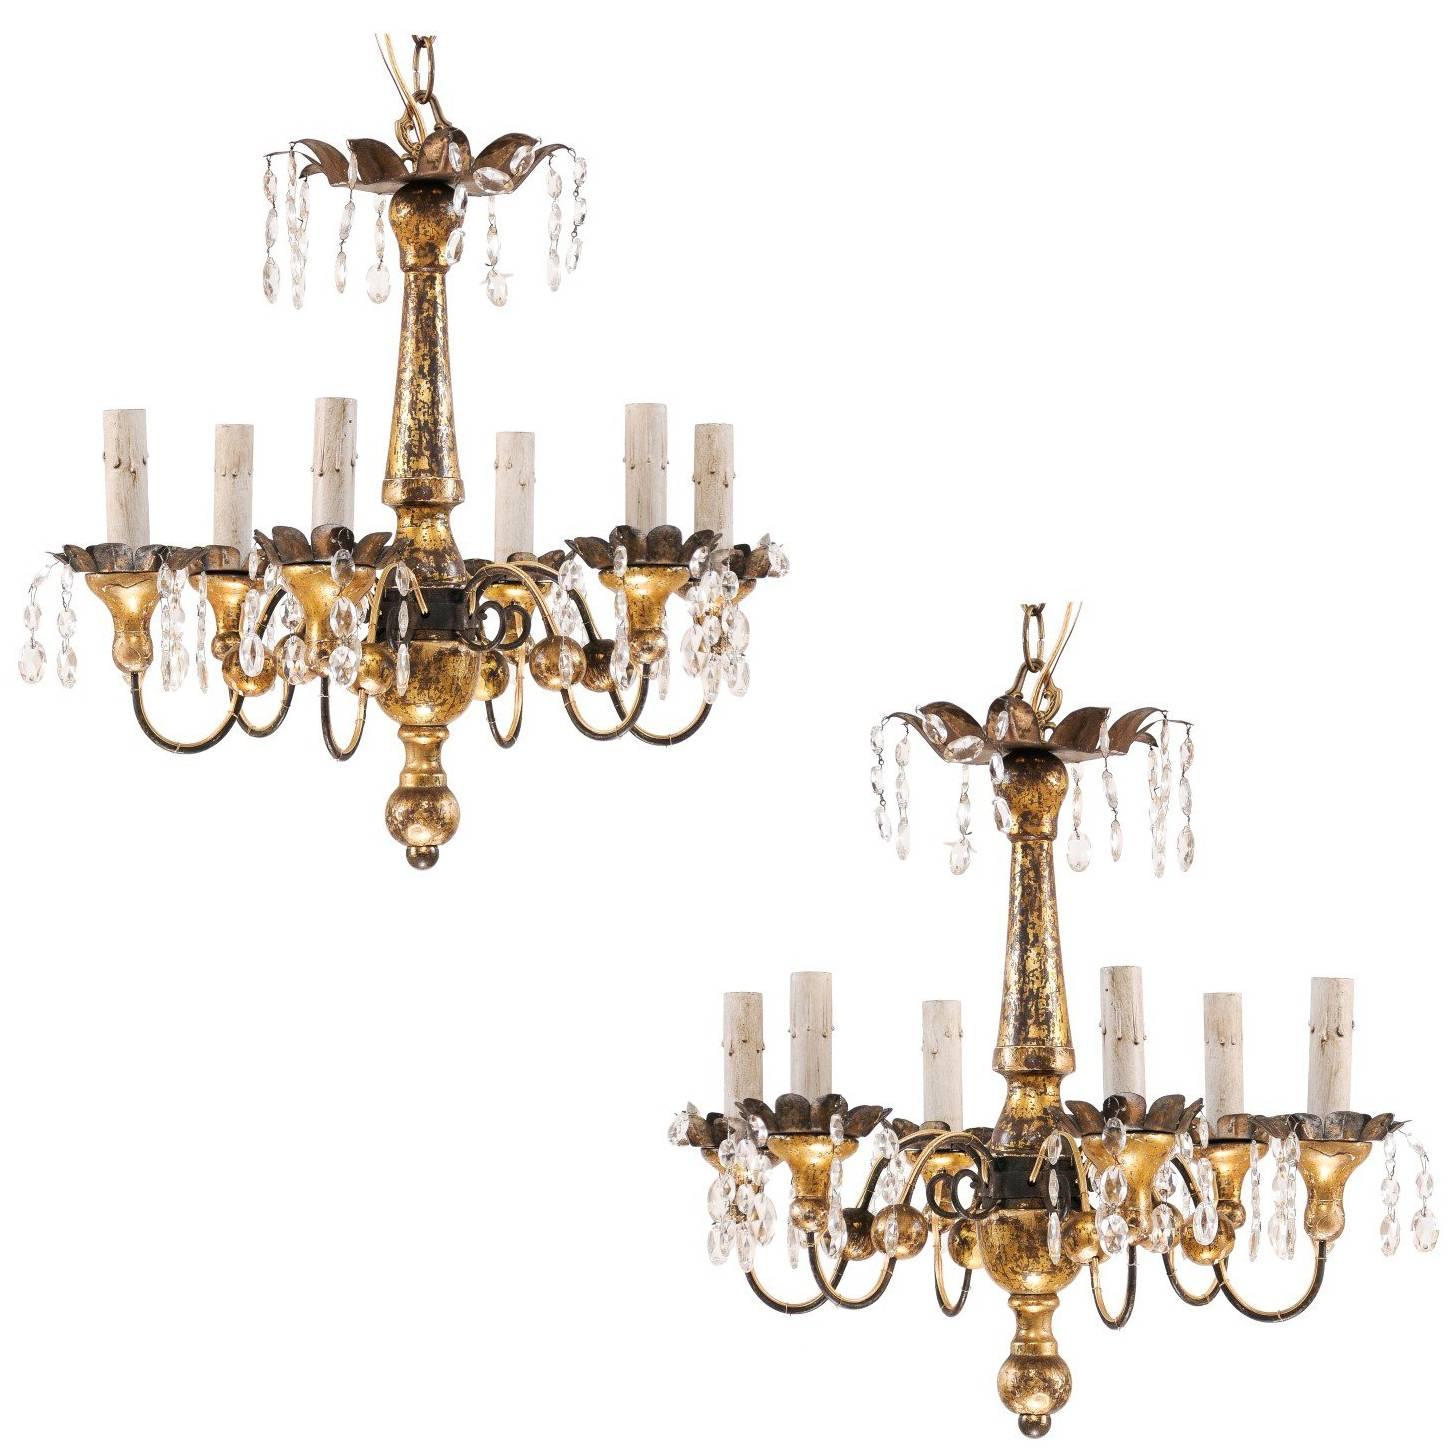 Pair of French Petite-Sized Painted Wood, Metal and Crystal Gold Chandeliers